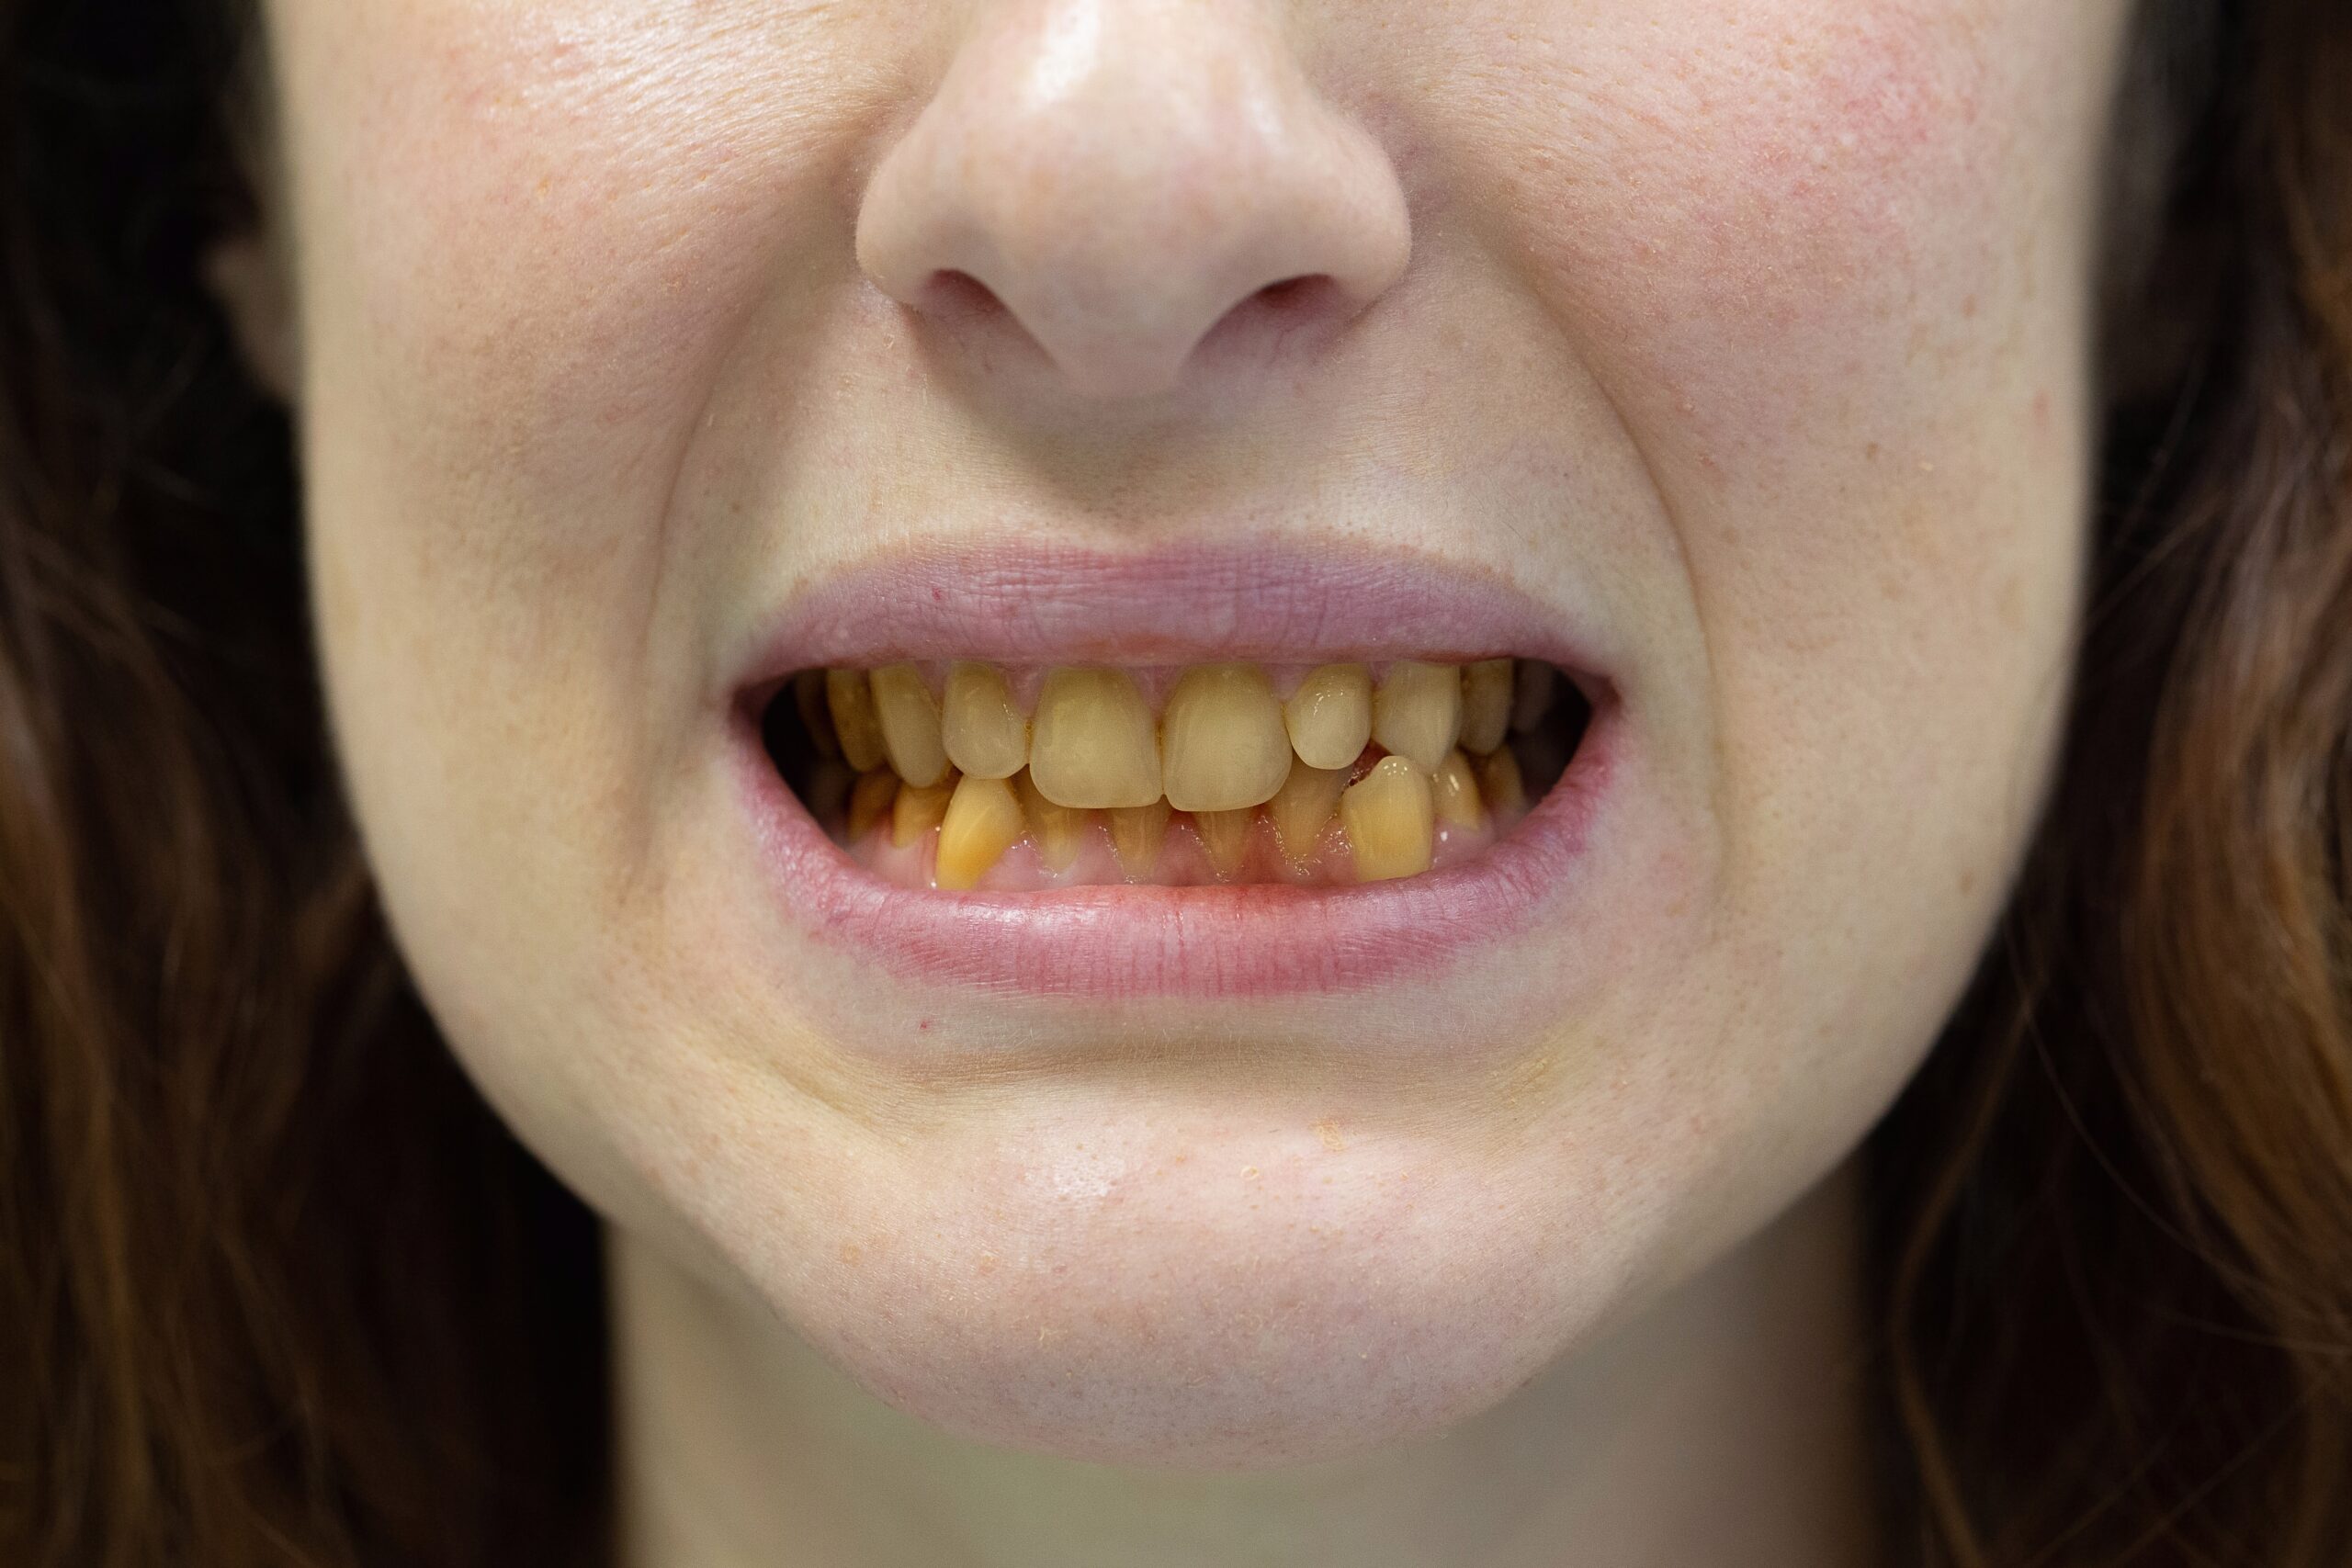 What are the most common causes of teeth discoloration?